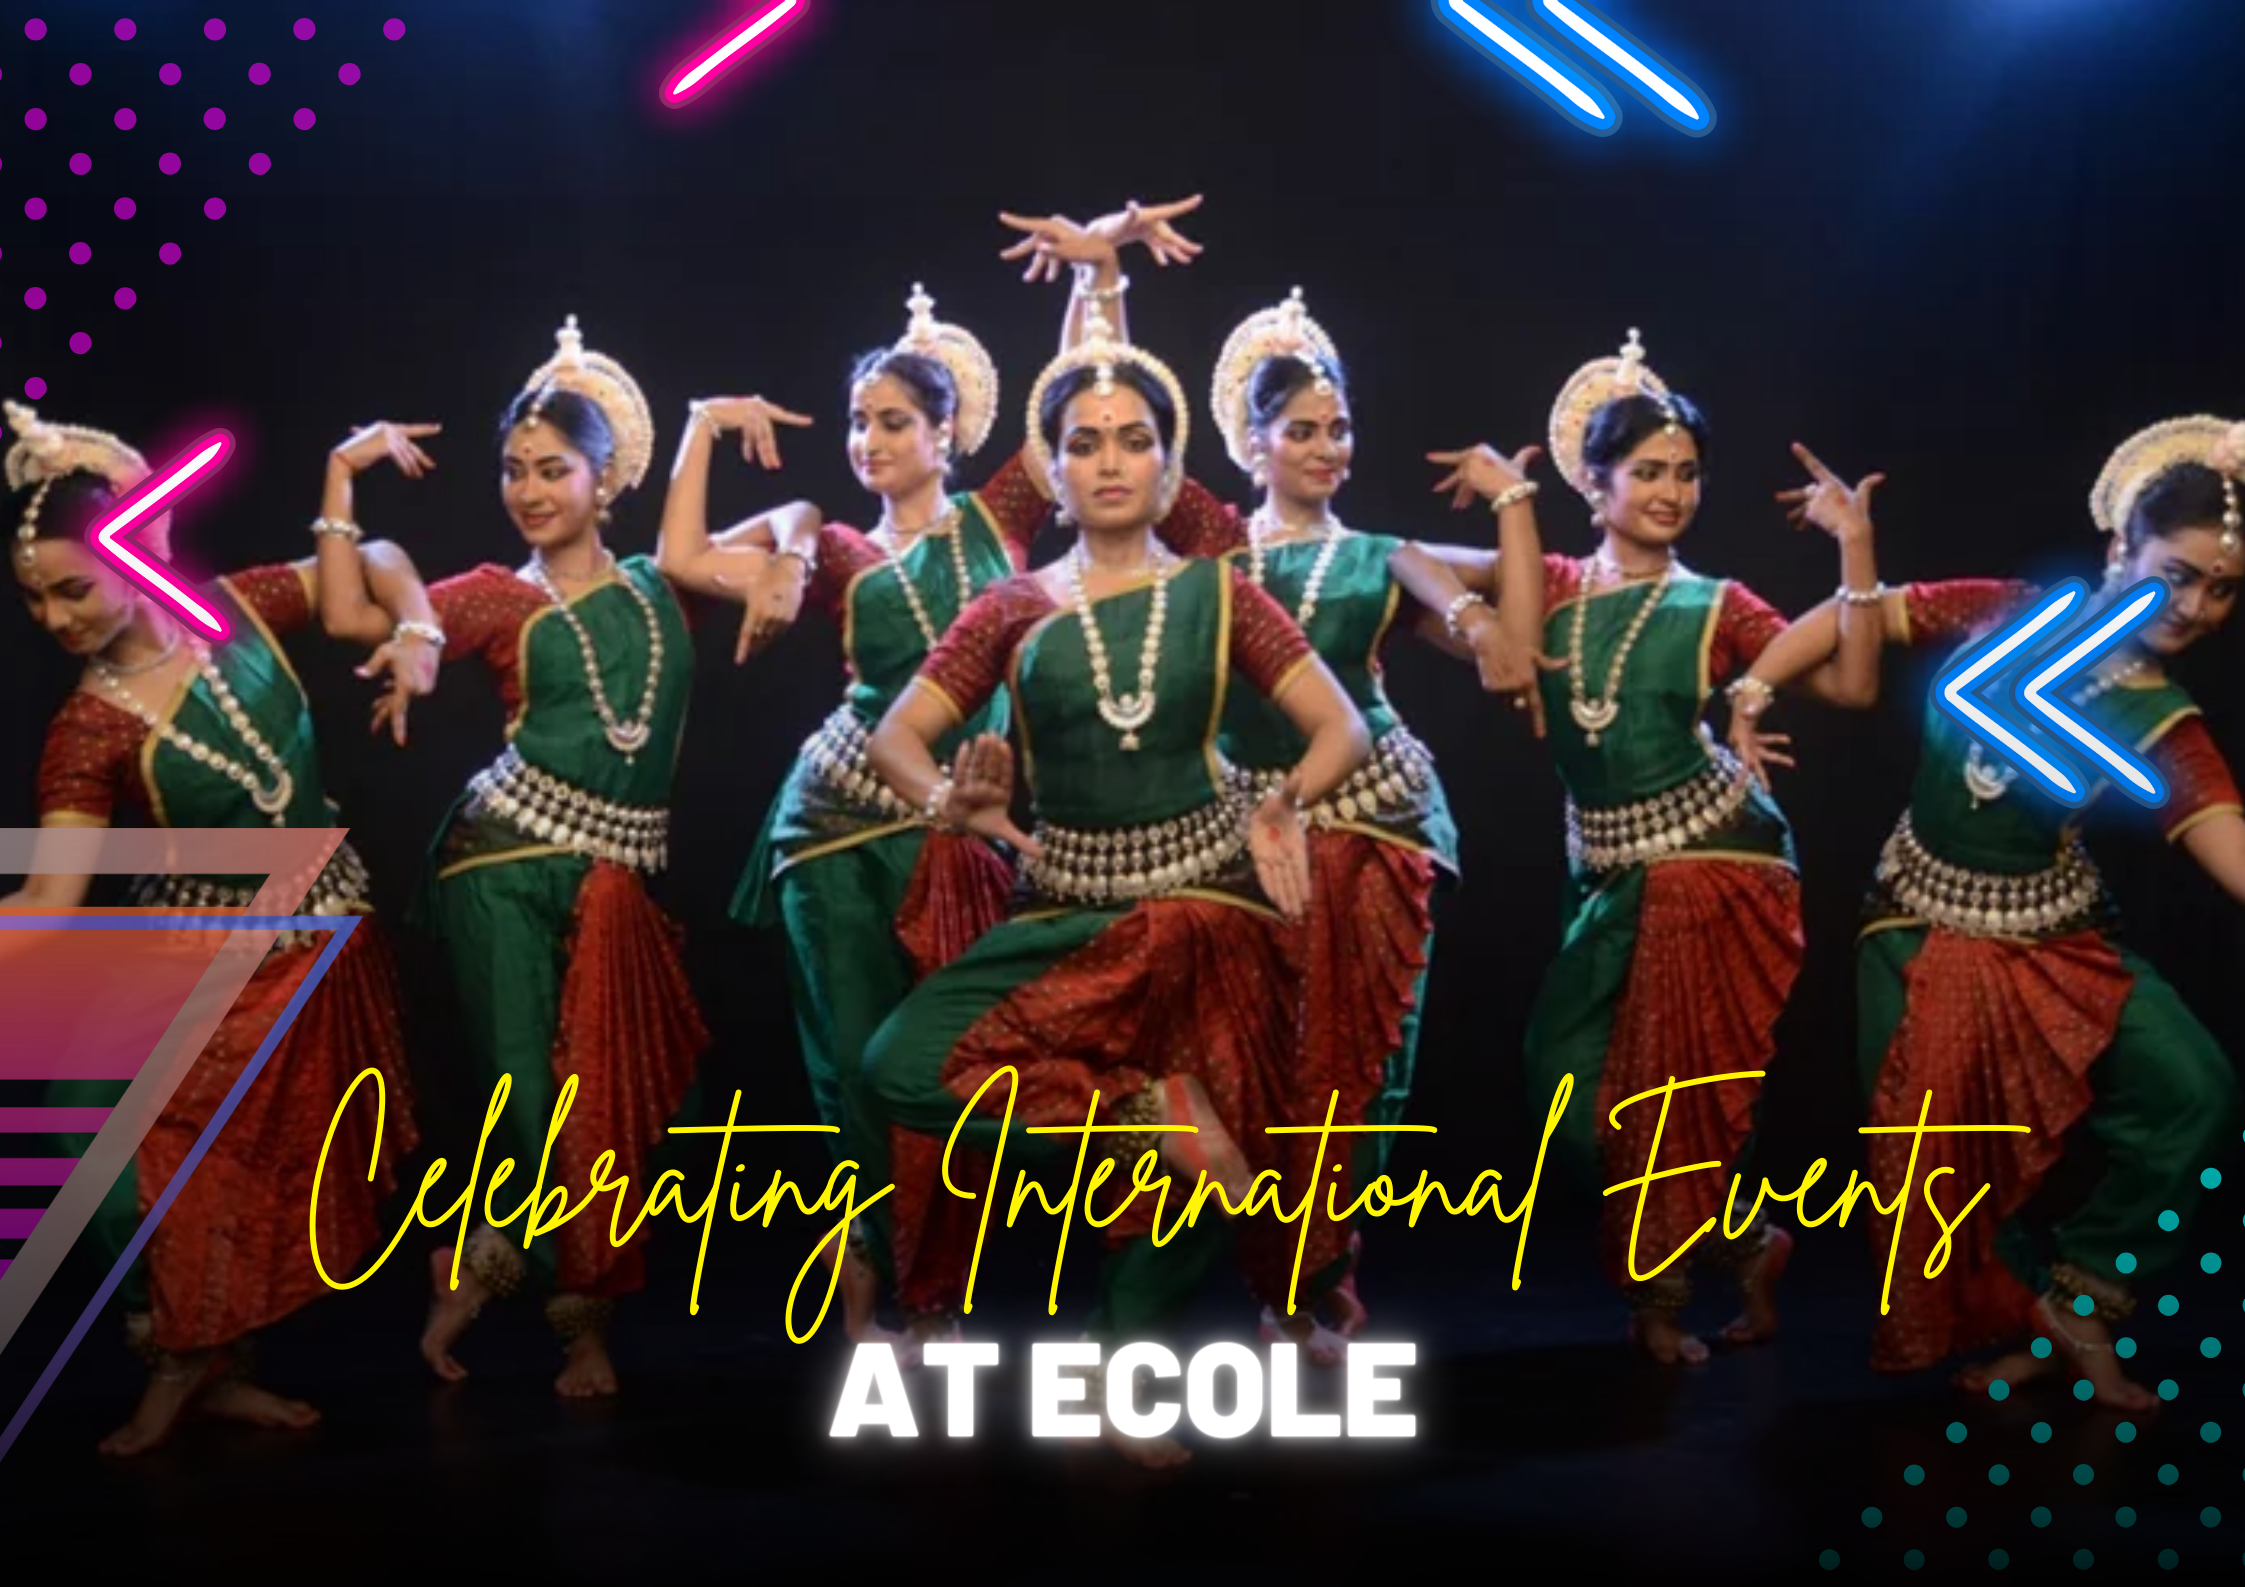 You are currently viewing Celebrating International Events: A Year at Ecole Globale